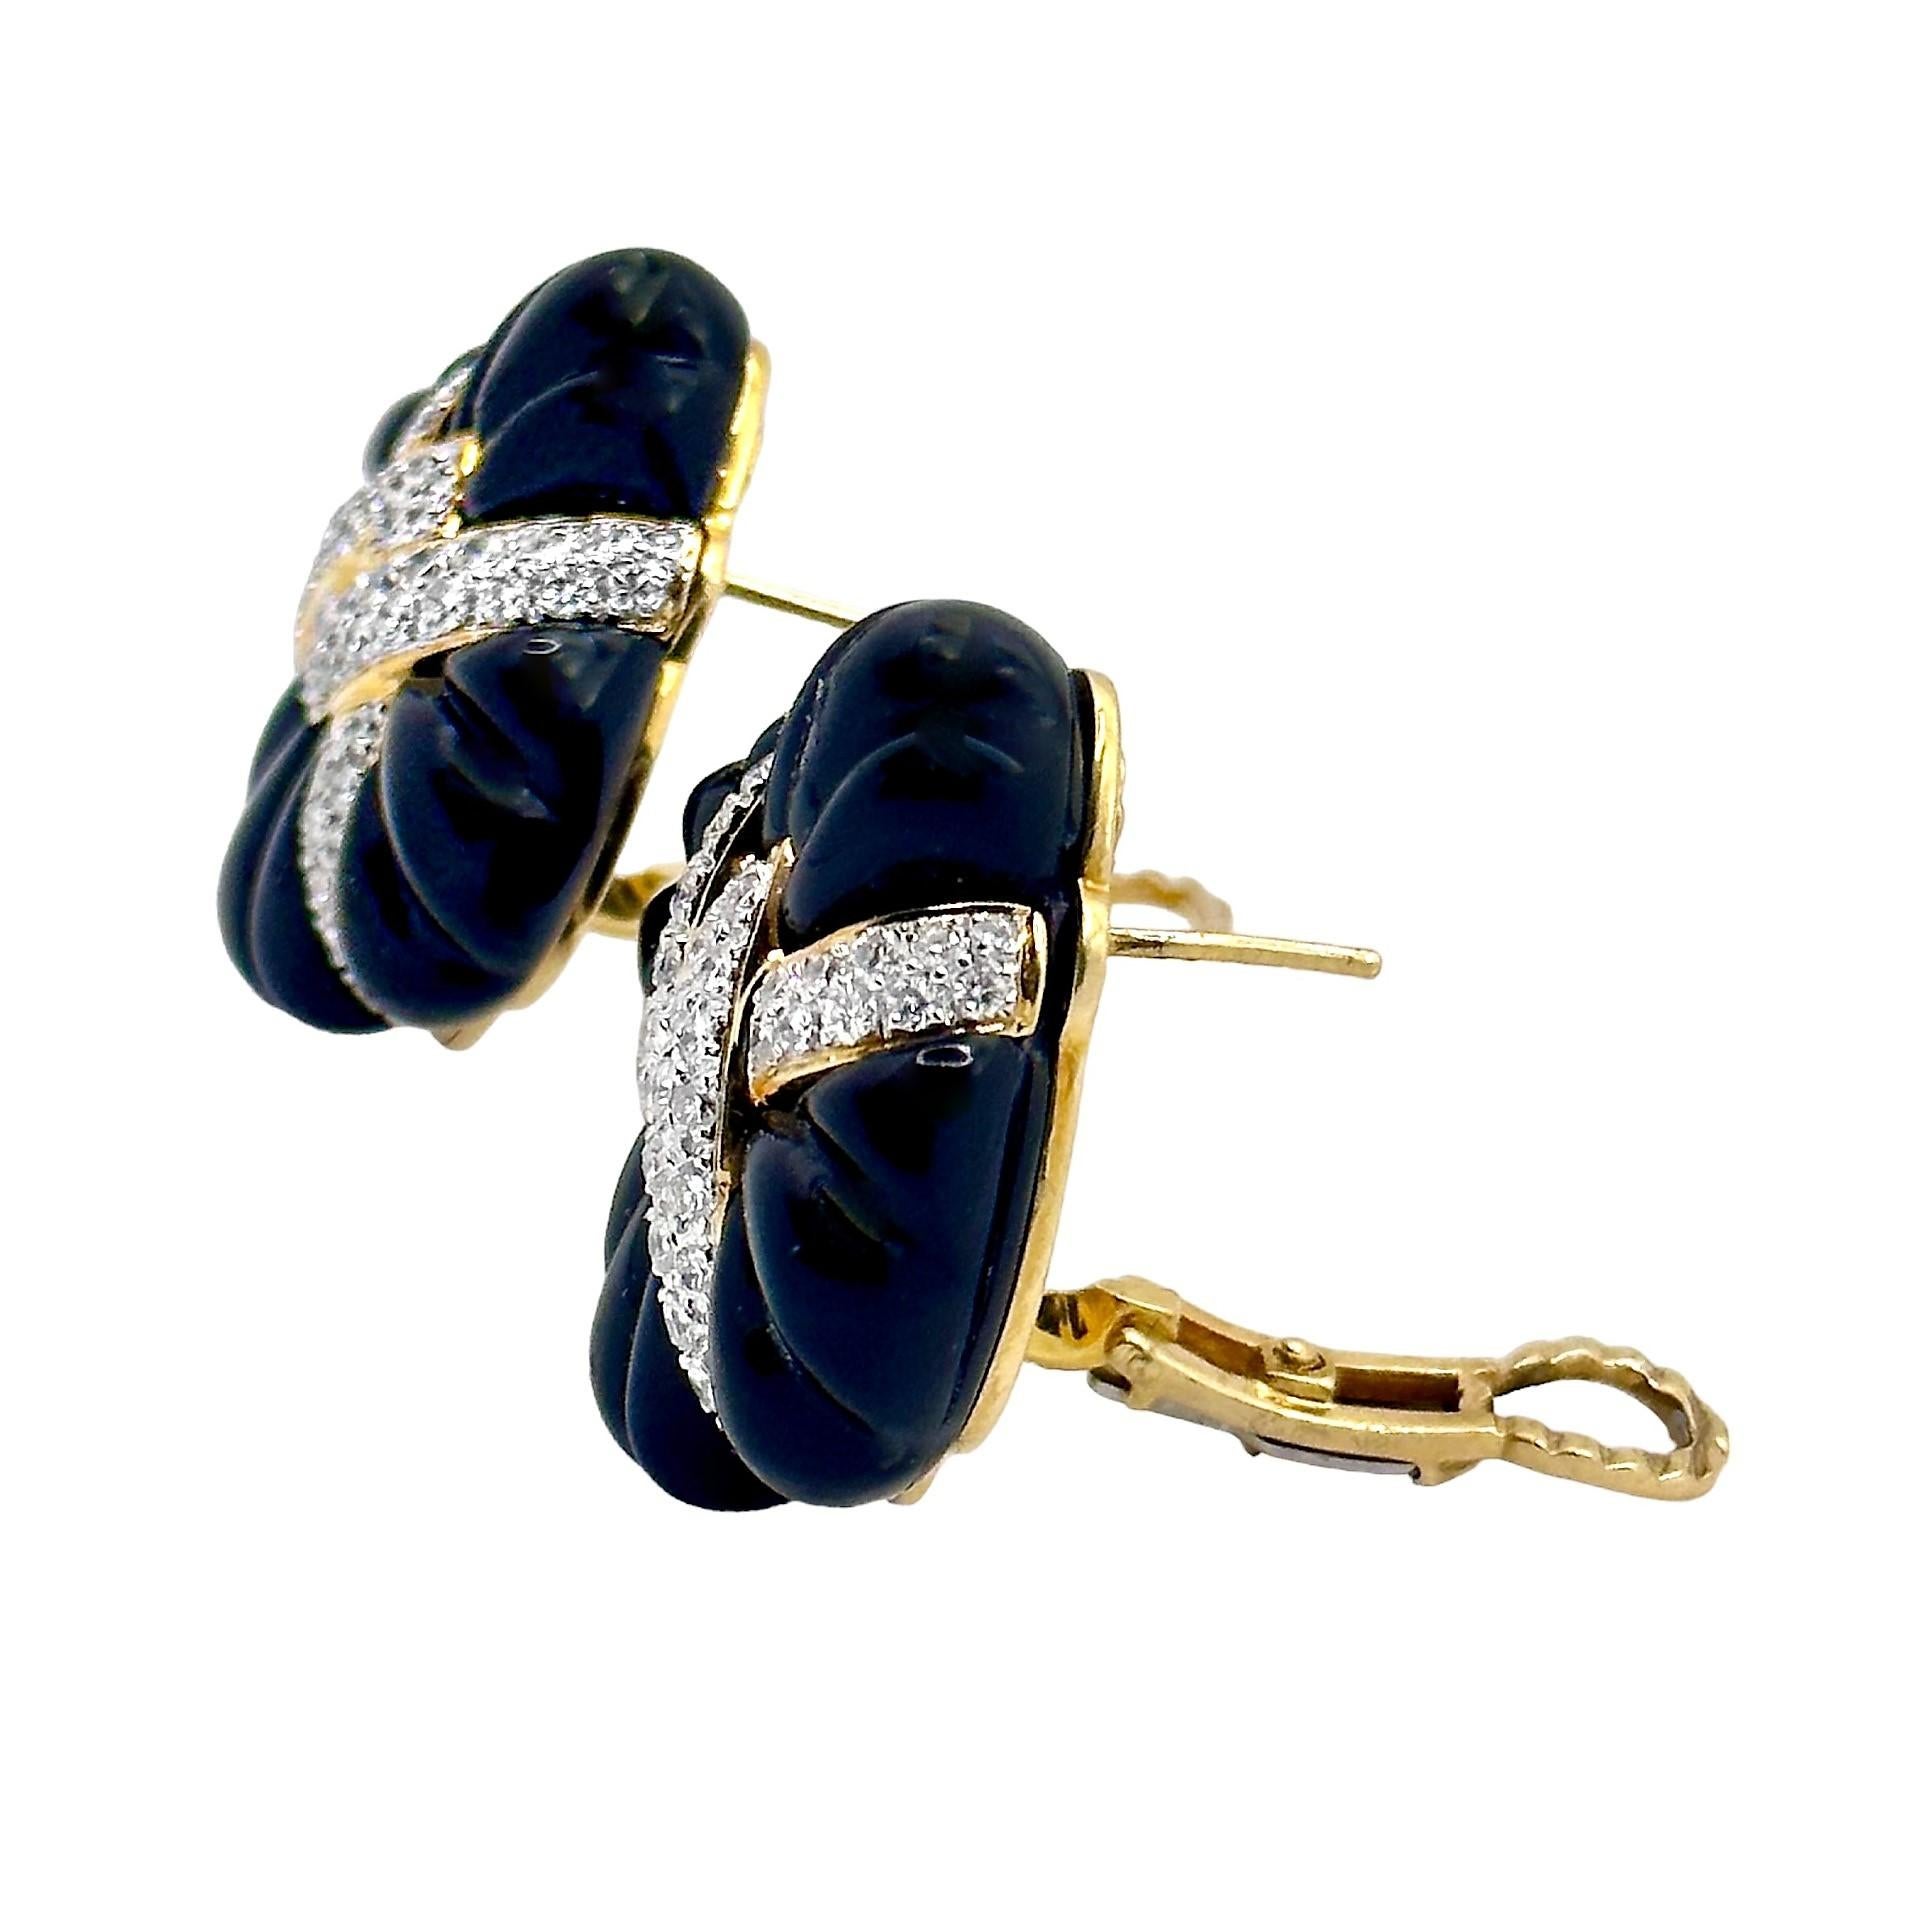 Modern Exquisitely Designed Gold, Diamond and Fluted Onyx Fashion Earrings 1.25 Inches